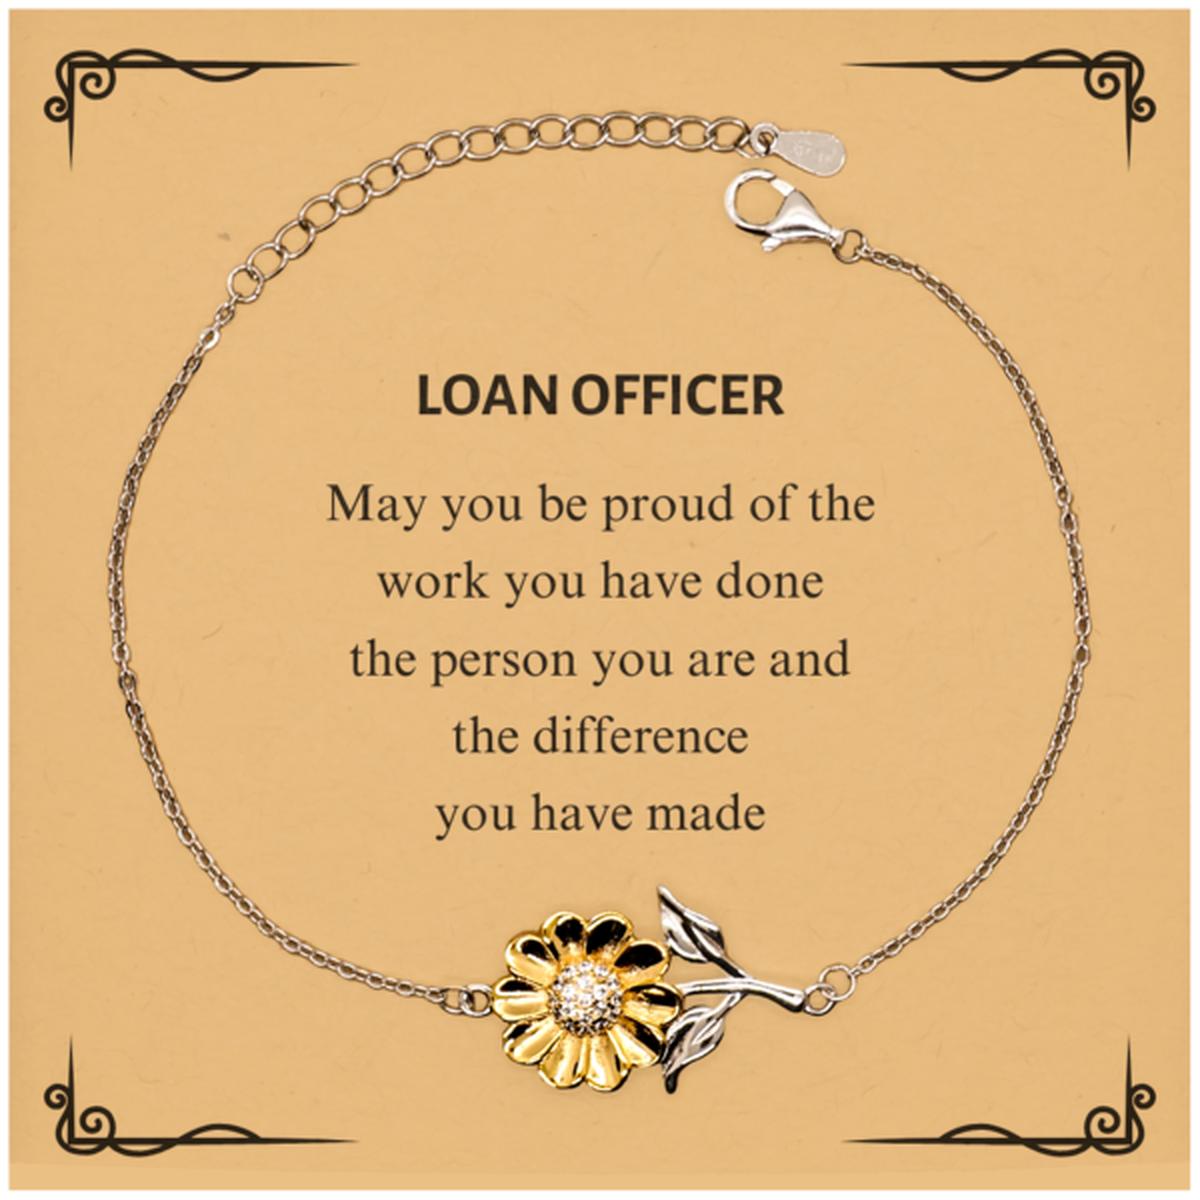 Loan Officer May you be proud of the work you have done, Retirement Loan Officer Sunflower Bracelet for Colleague Appreciation Gifts Amazing for Loan Officer